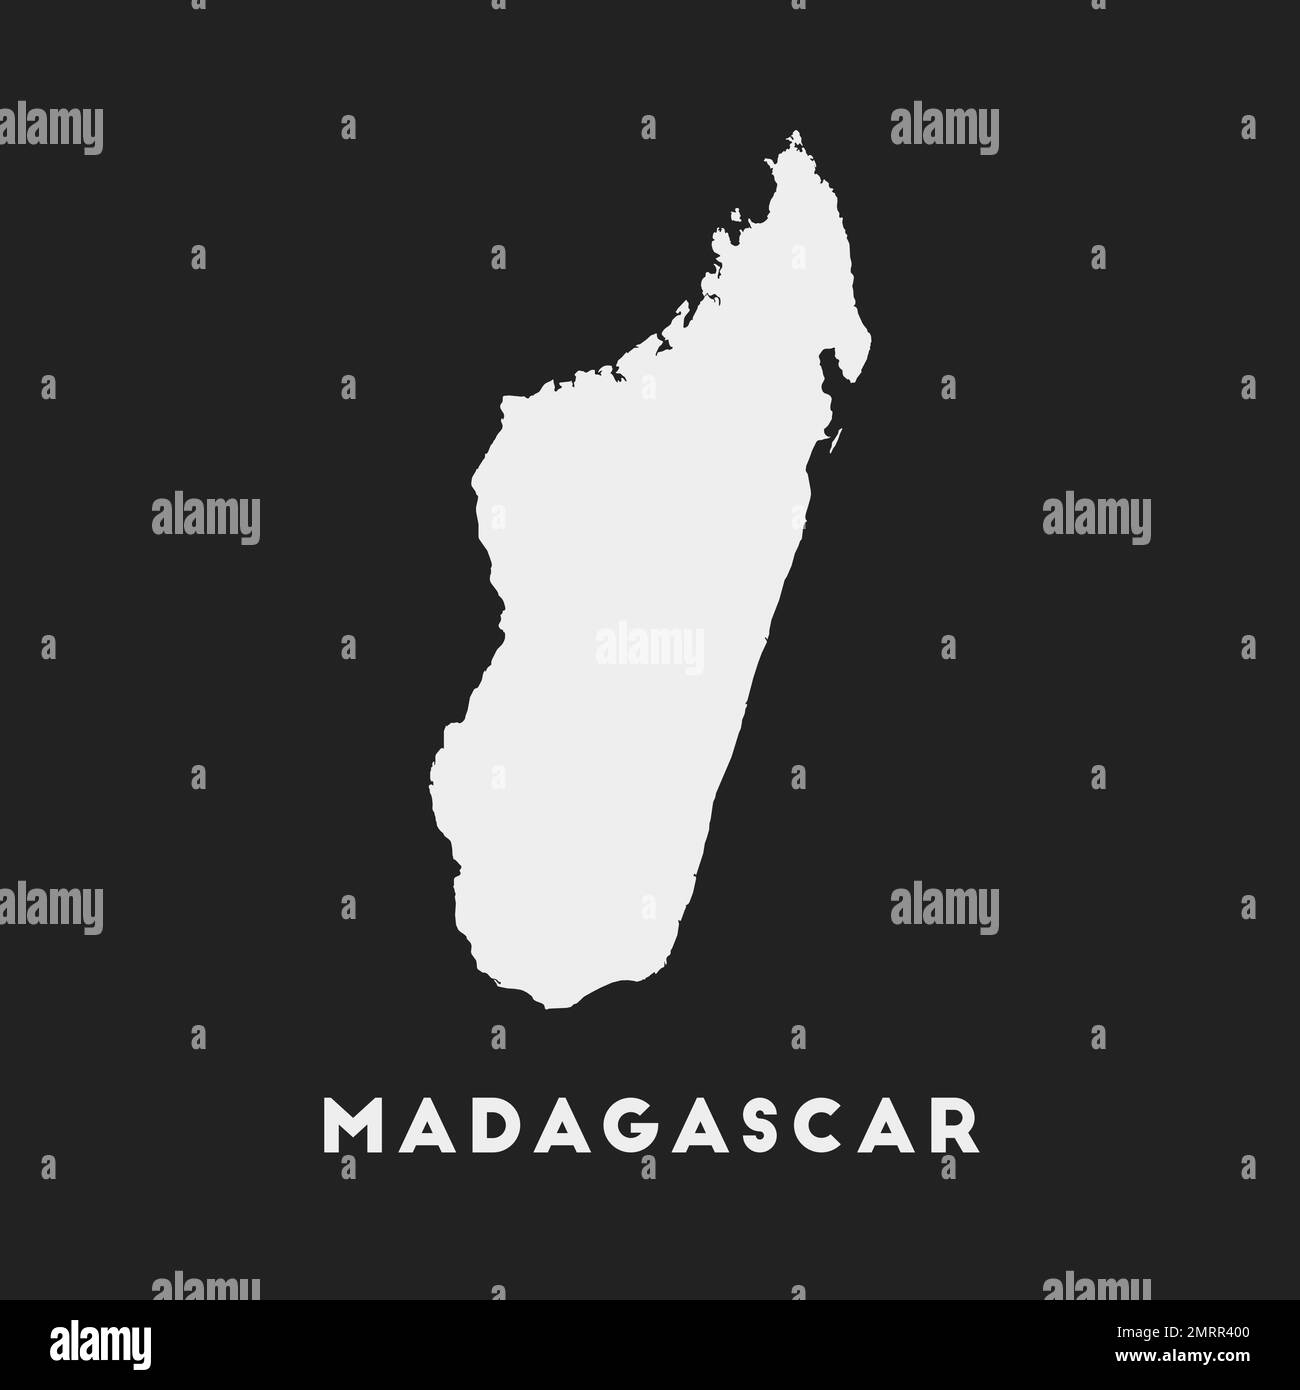 Madagascar icon. Country map on dark background. Stylish Madagascar map with country name. Vector illustration. Stock Vector